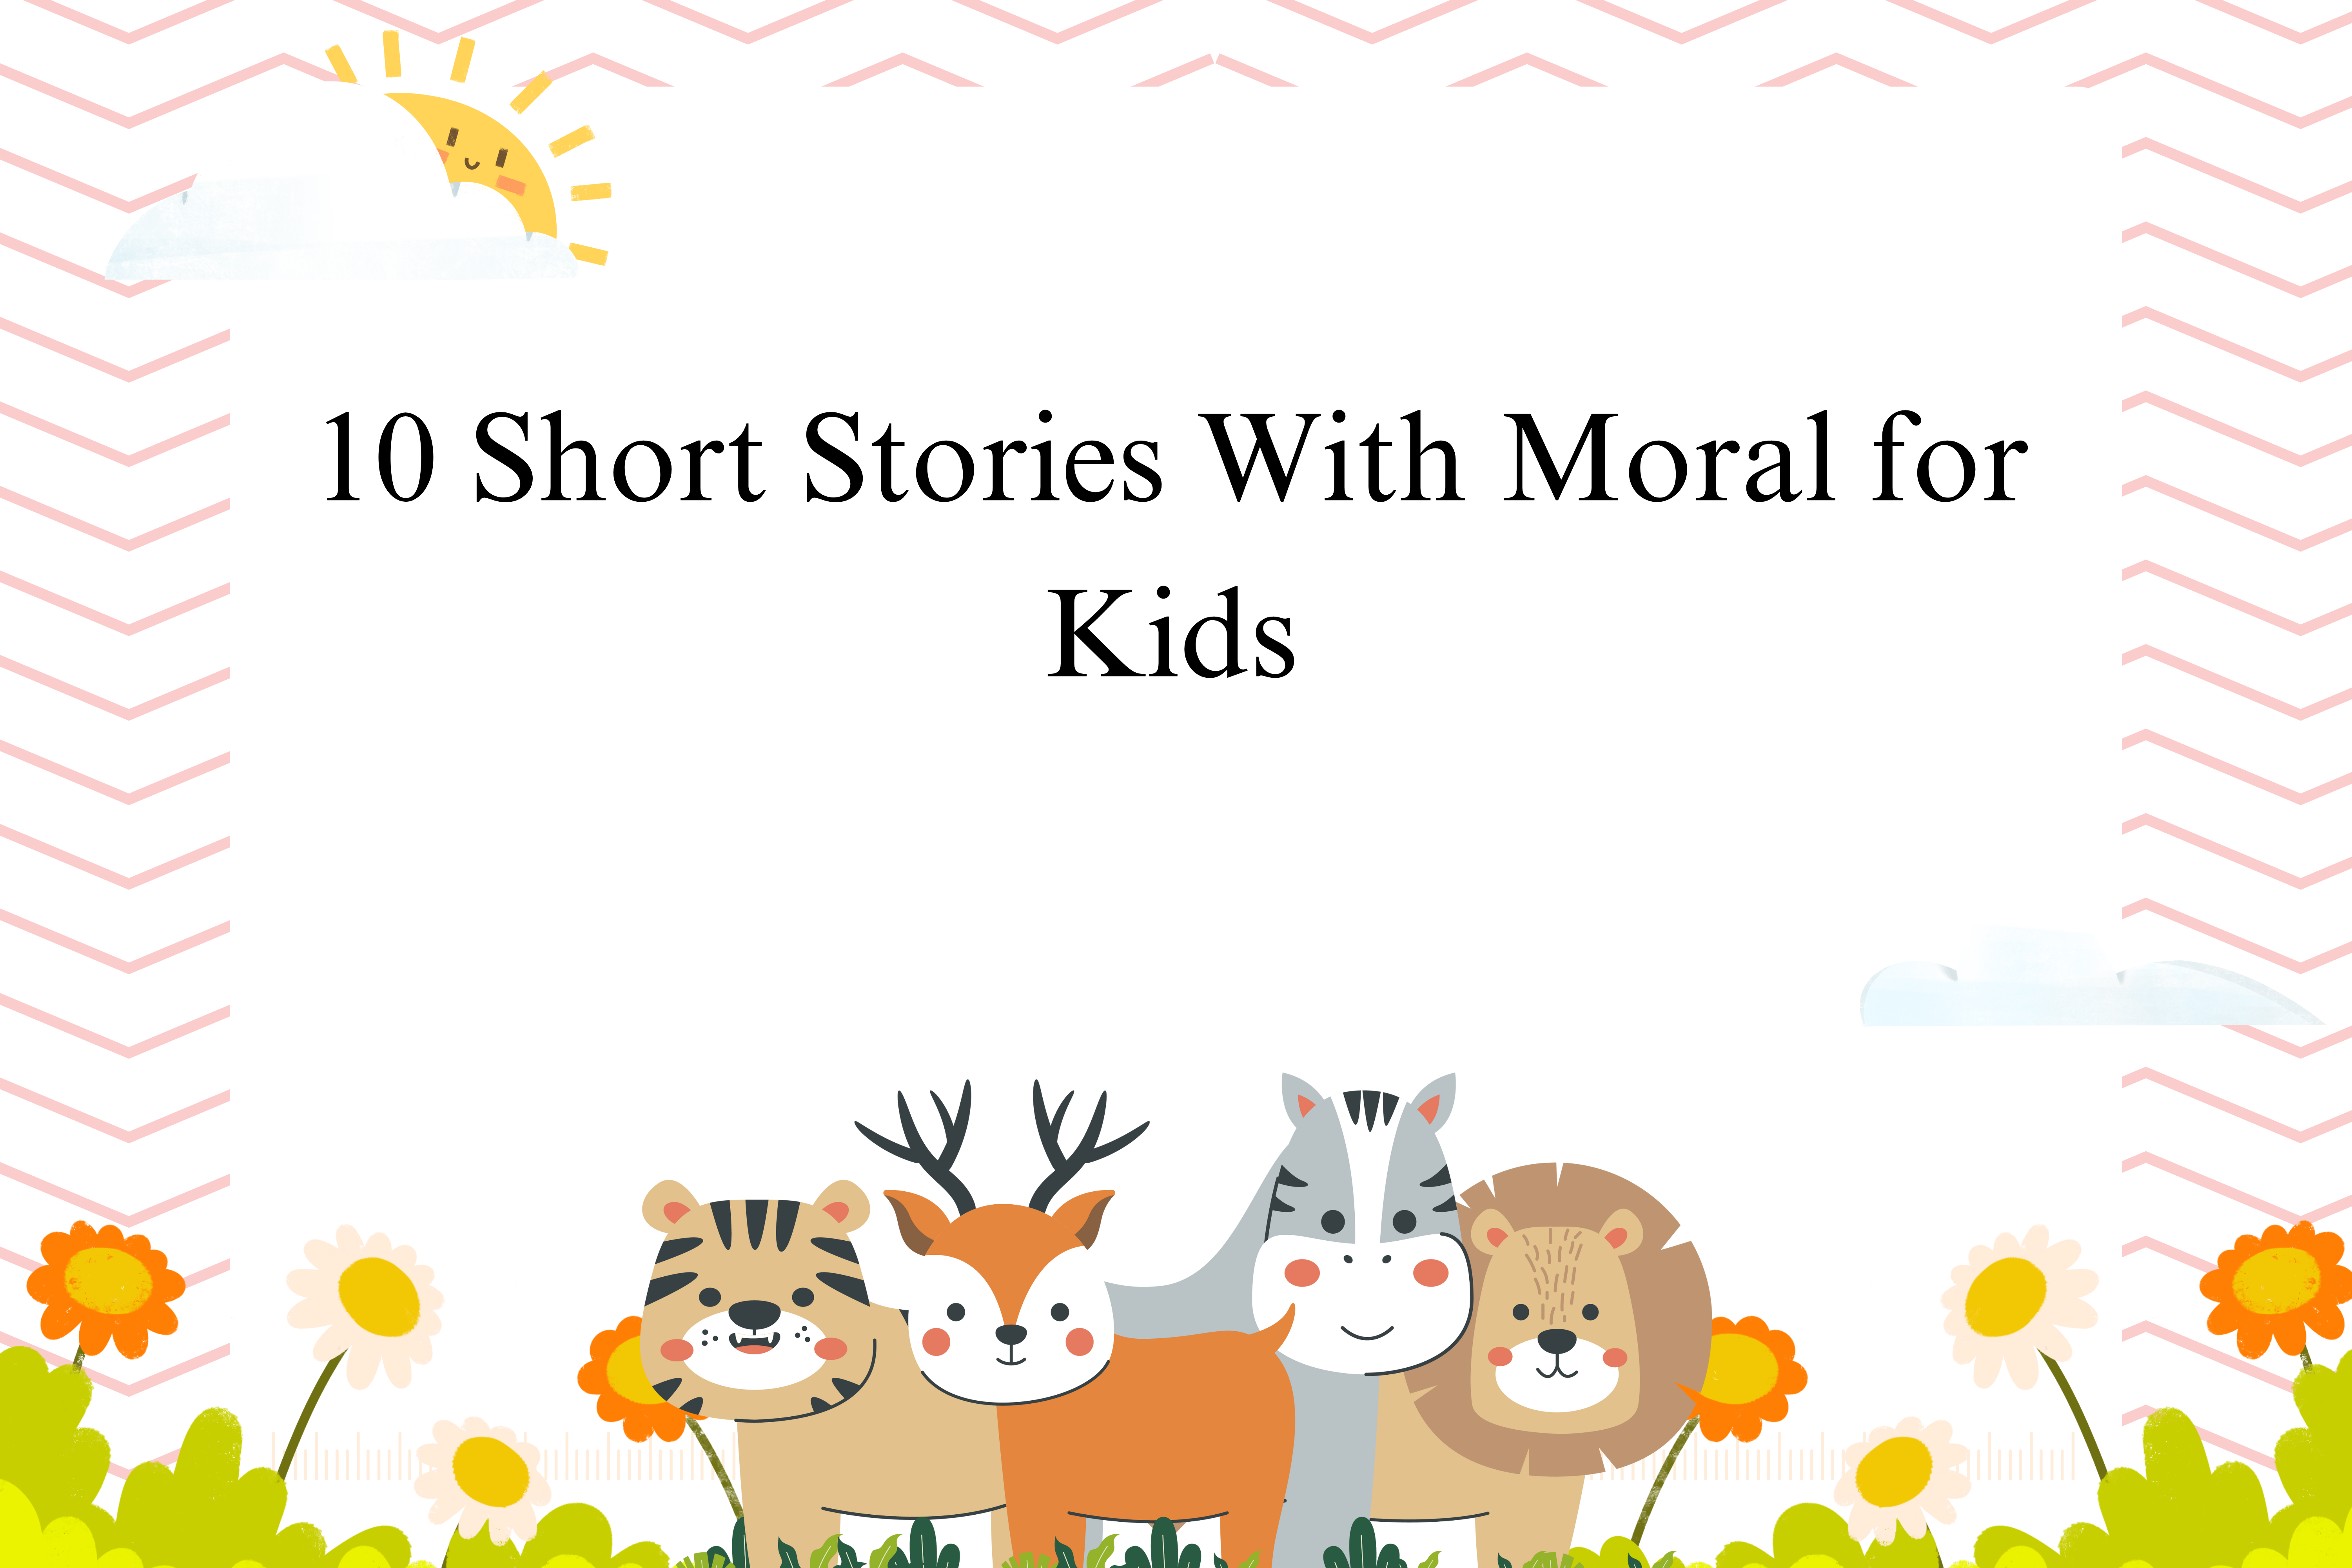 10 Short Stories With Moral for Kids